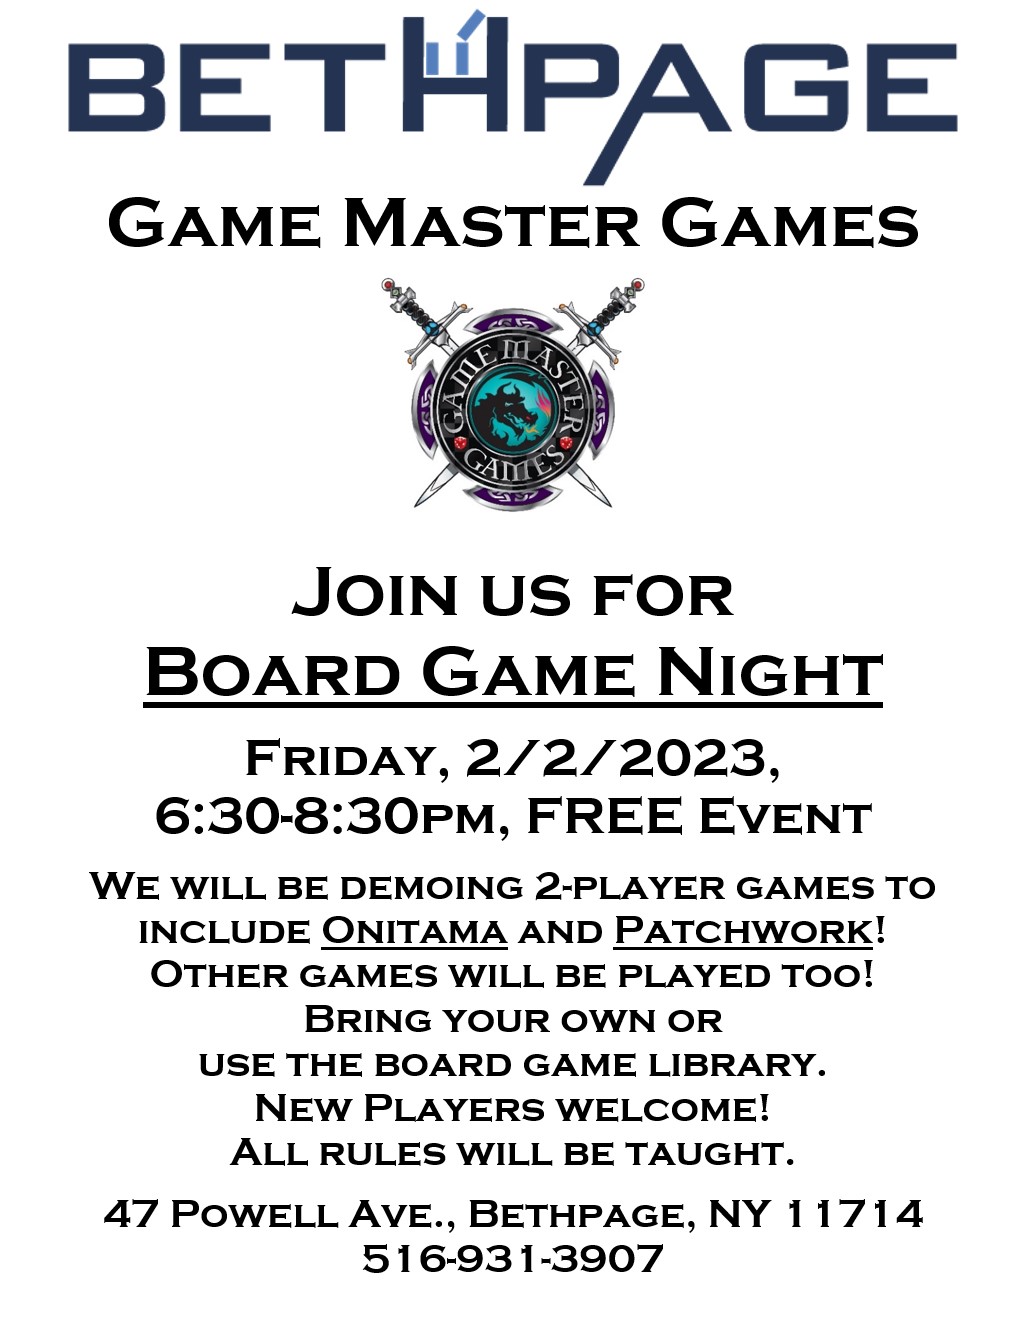 Want some good free friendly fun? Join us for Bethpage Library’s Board Game Night!